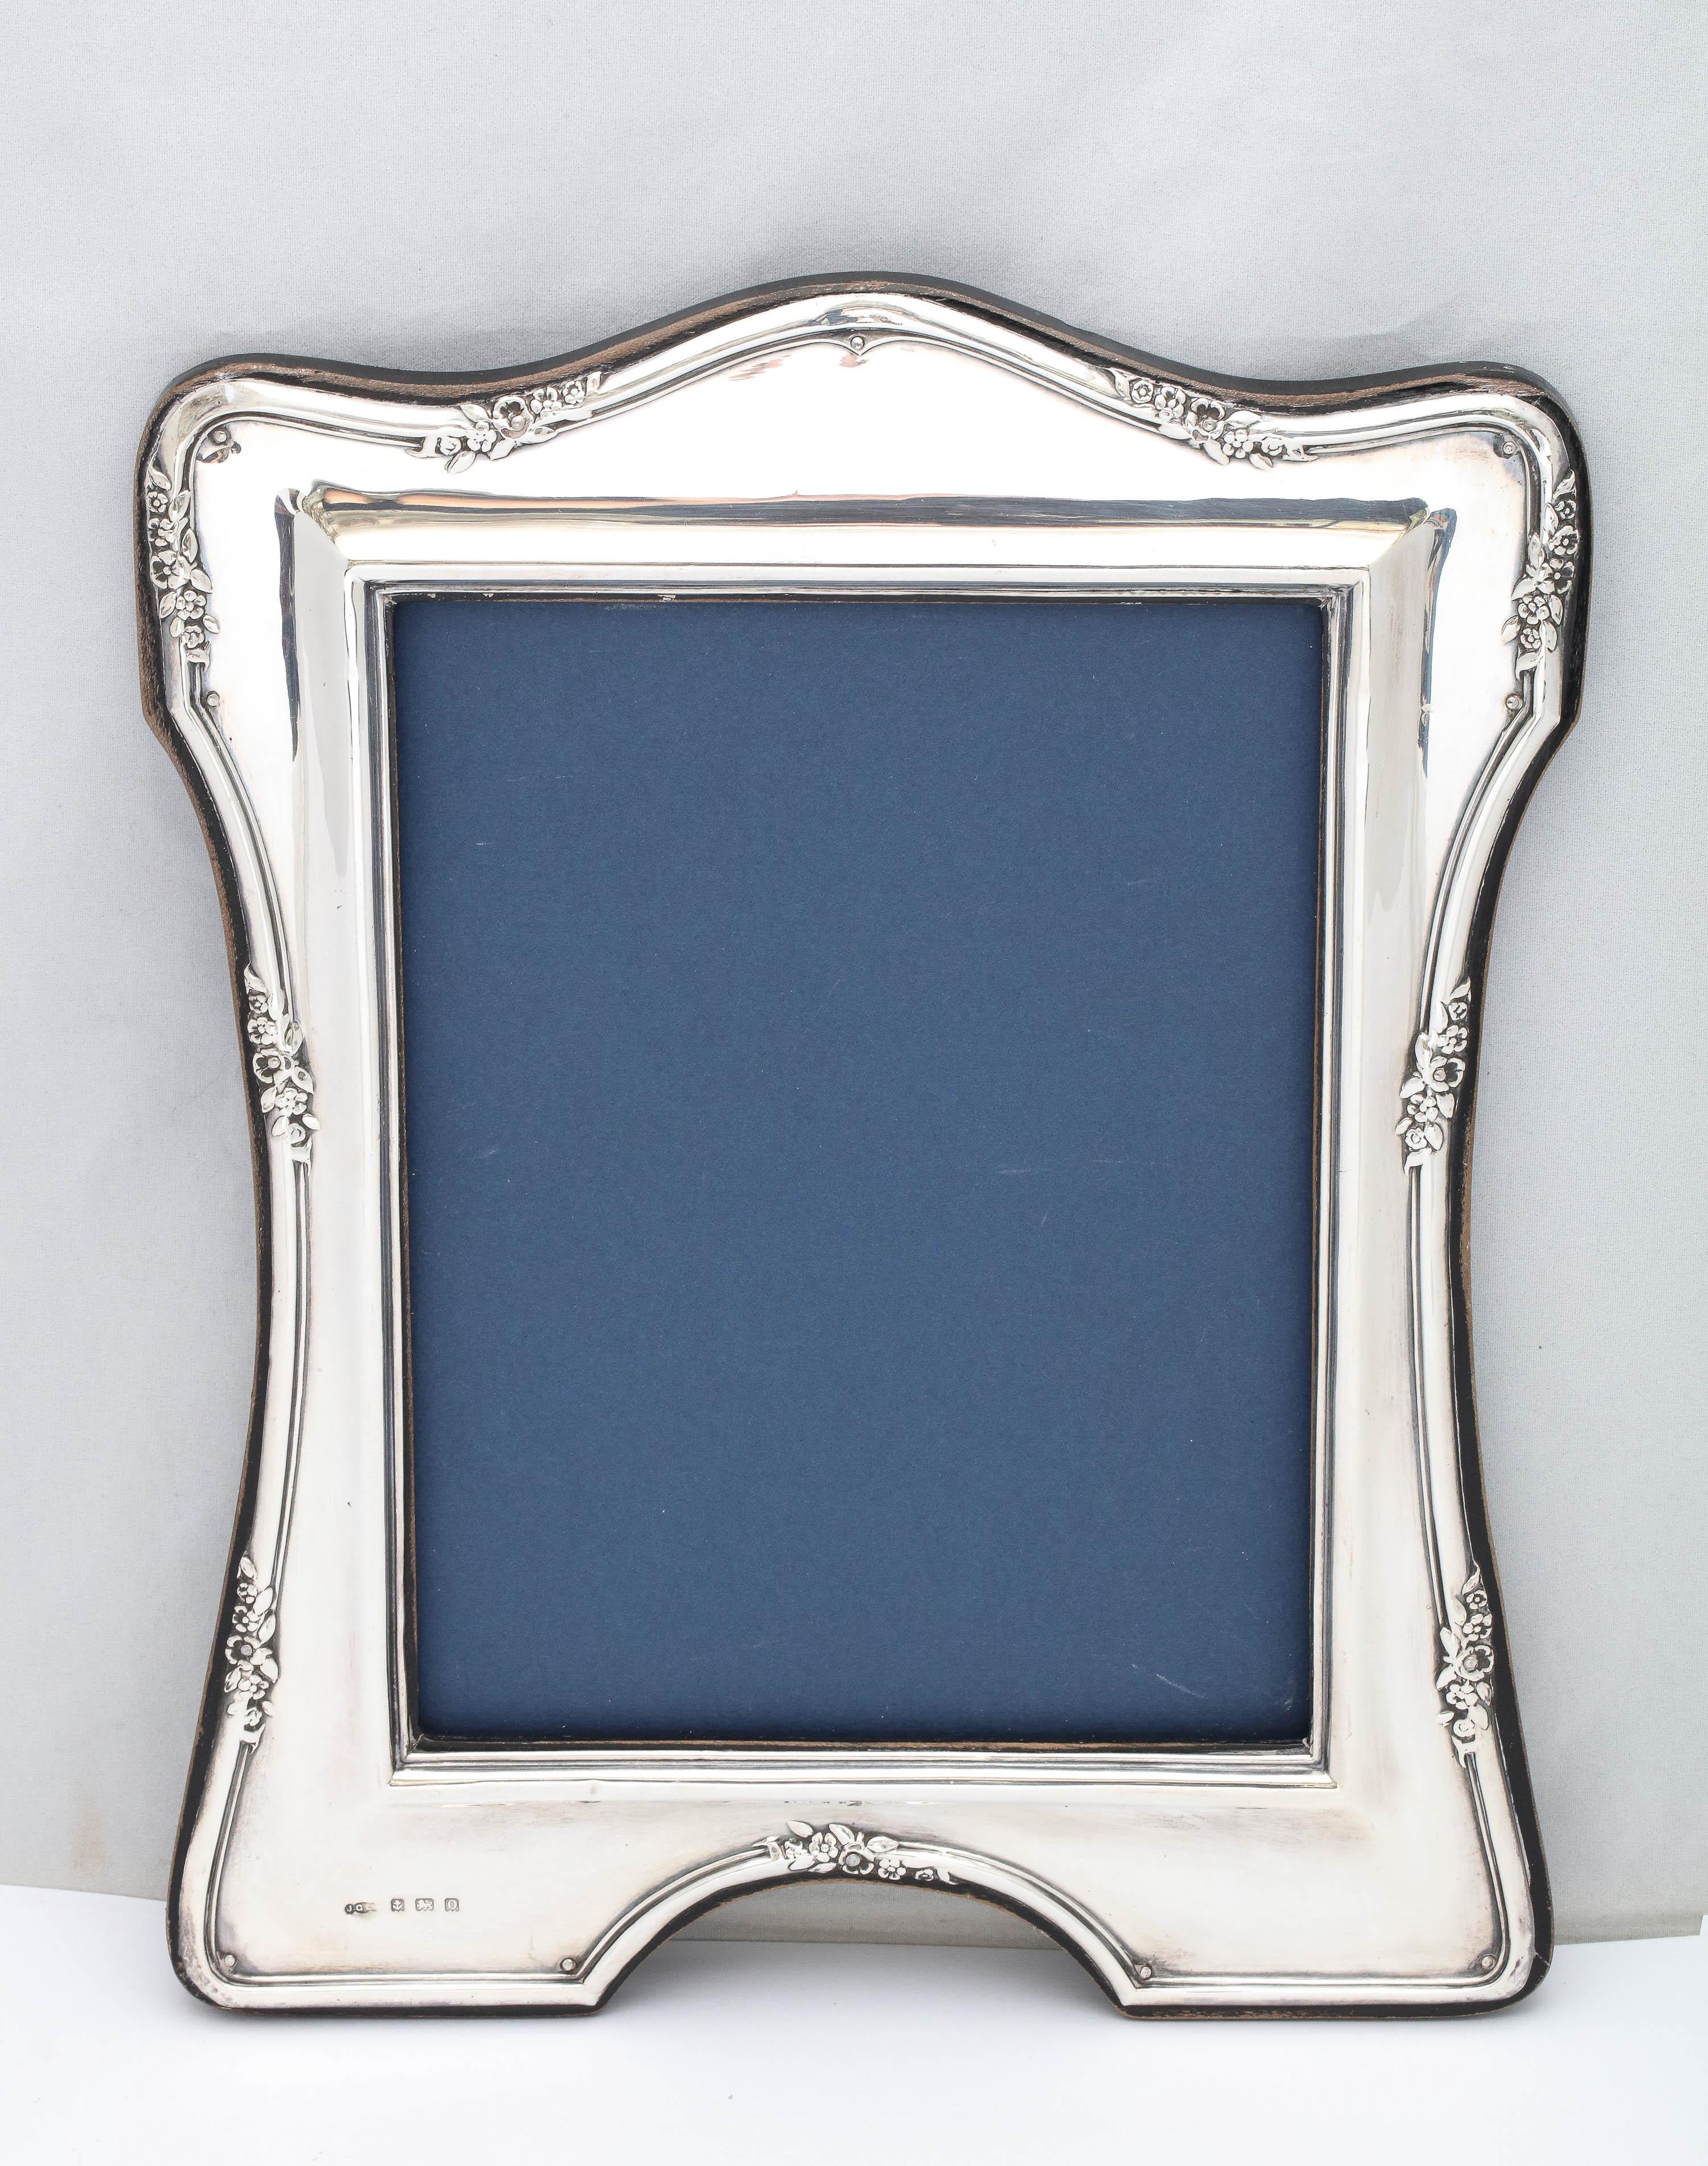 Large, sterling silver wood-backed picture frame, Birmingham, England, year-hallmarked for 1913, Joseph Gloster, Ltd. - makers. Measures 12 inches high (at highest point) x 9 1/4 inches wide (at widest point) x 5 inches deep when easel is in open